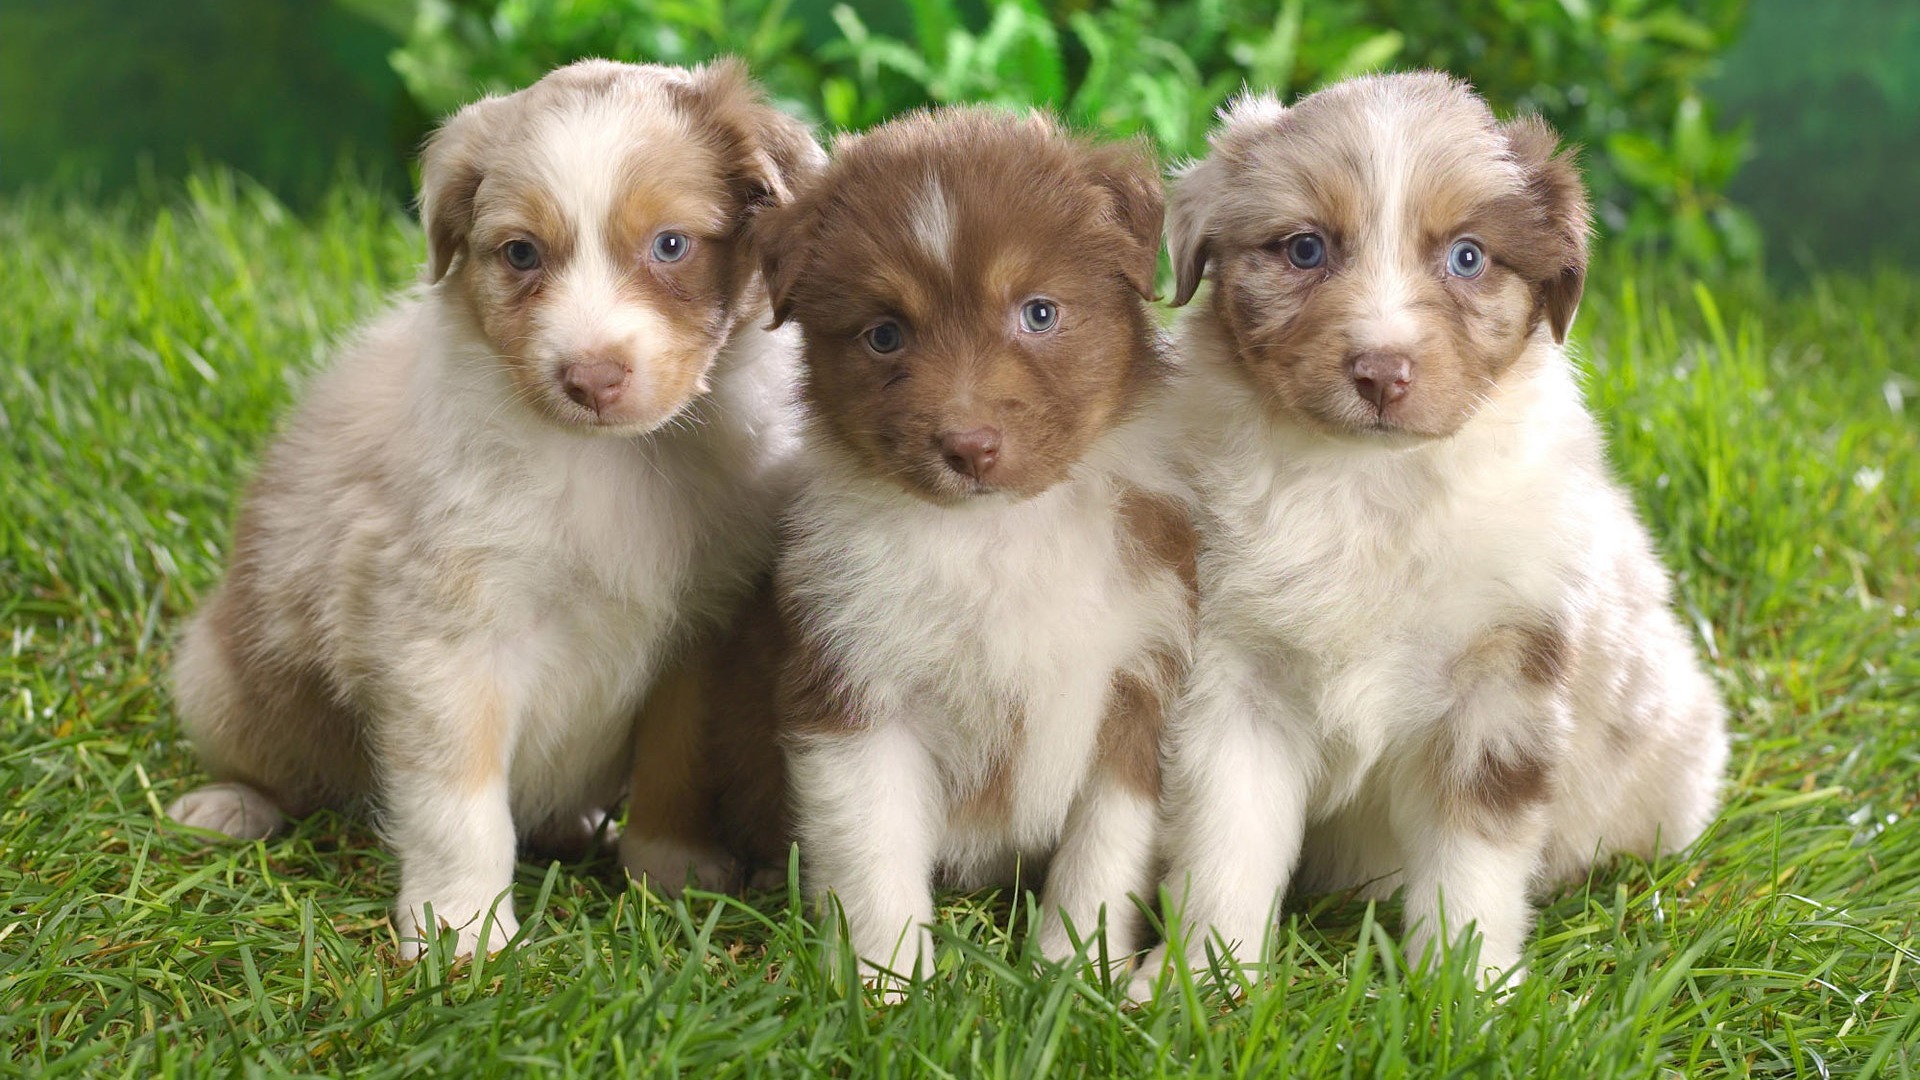 Puppy Photo HD wallpapers (10) #20 - 1920x1080